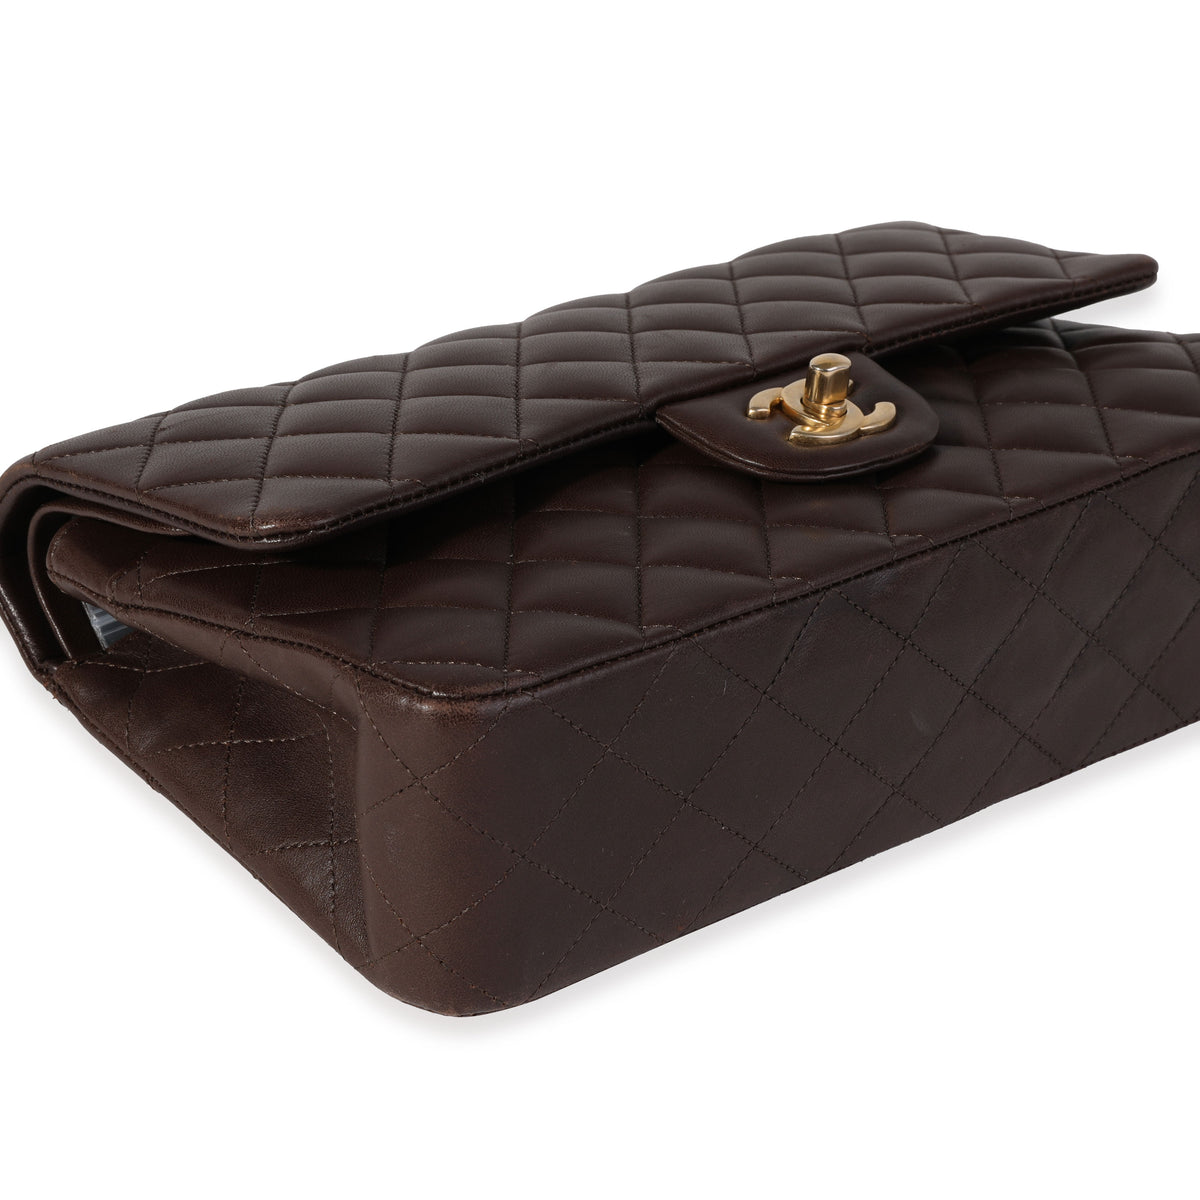 CHANEL, Bags, Chanel Classic Flap Bag In Chocolate Brown